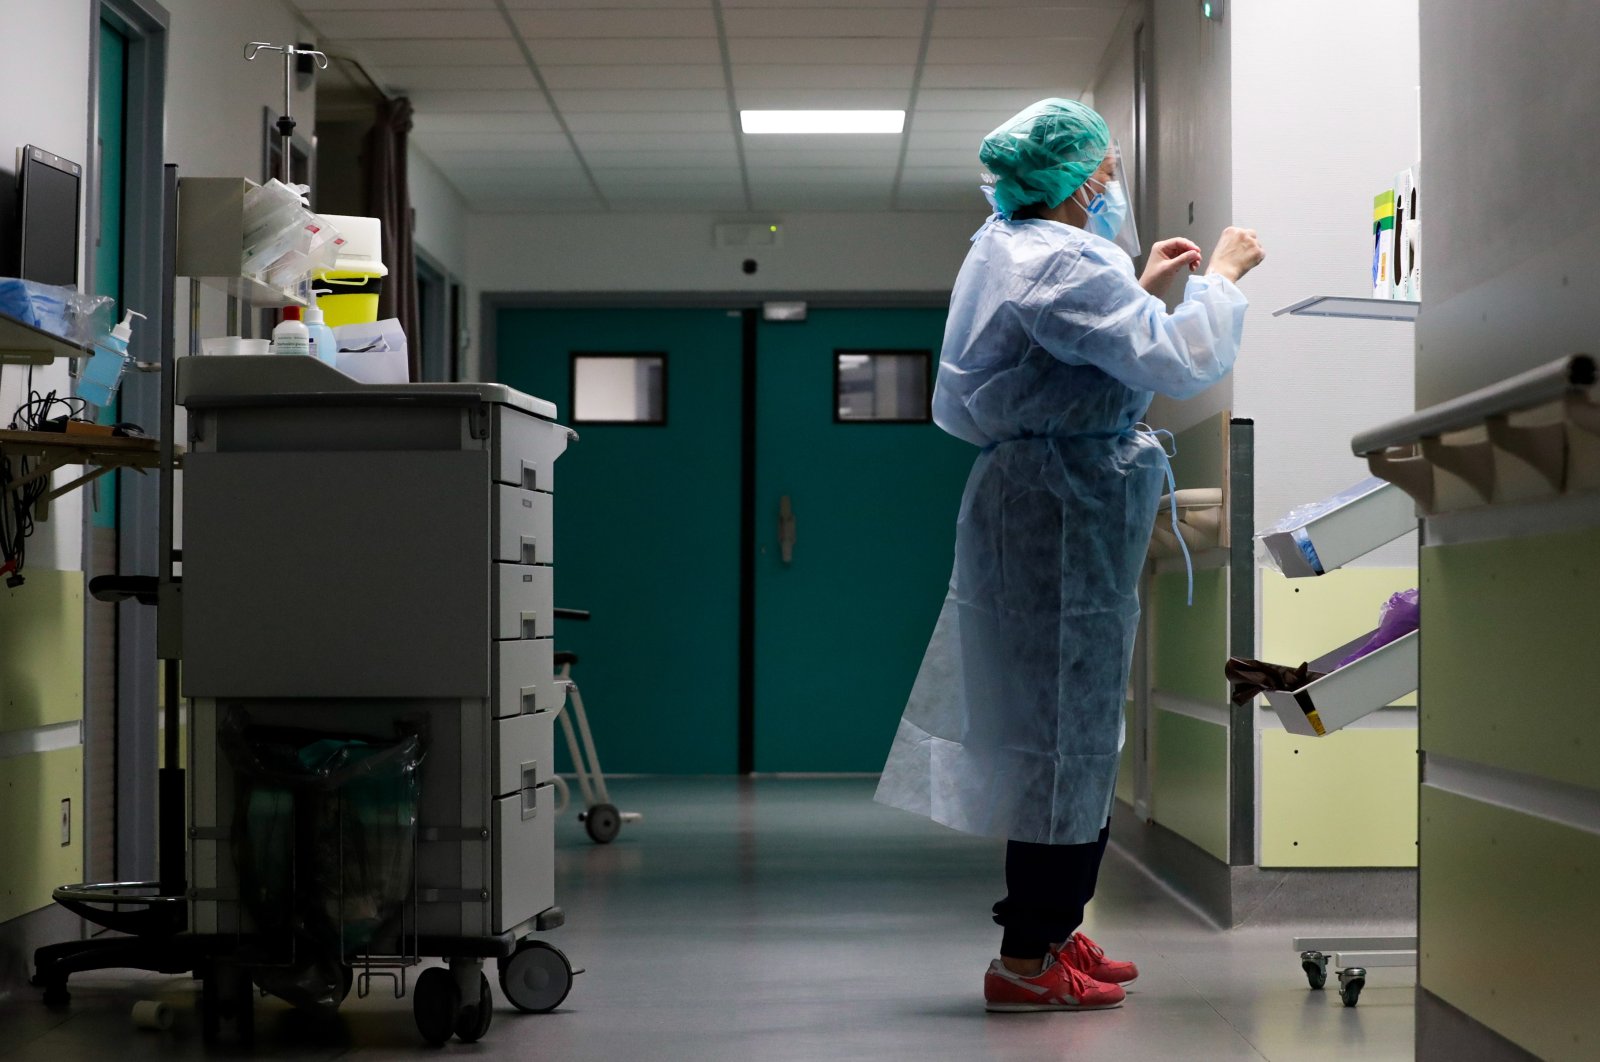 A nurse prepares to provide care to a patient with coronavirus in the COVID-19 hospitalization unit at the Etterbeek-Ixelles site of the Iris Sud Hospitals, Brussels, Oct. 21, 2020. (EPA Photo)